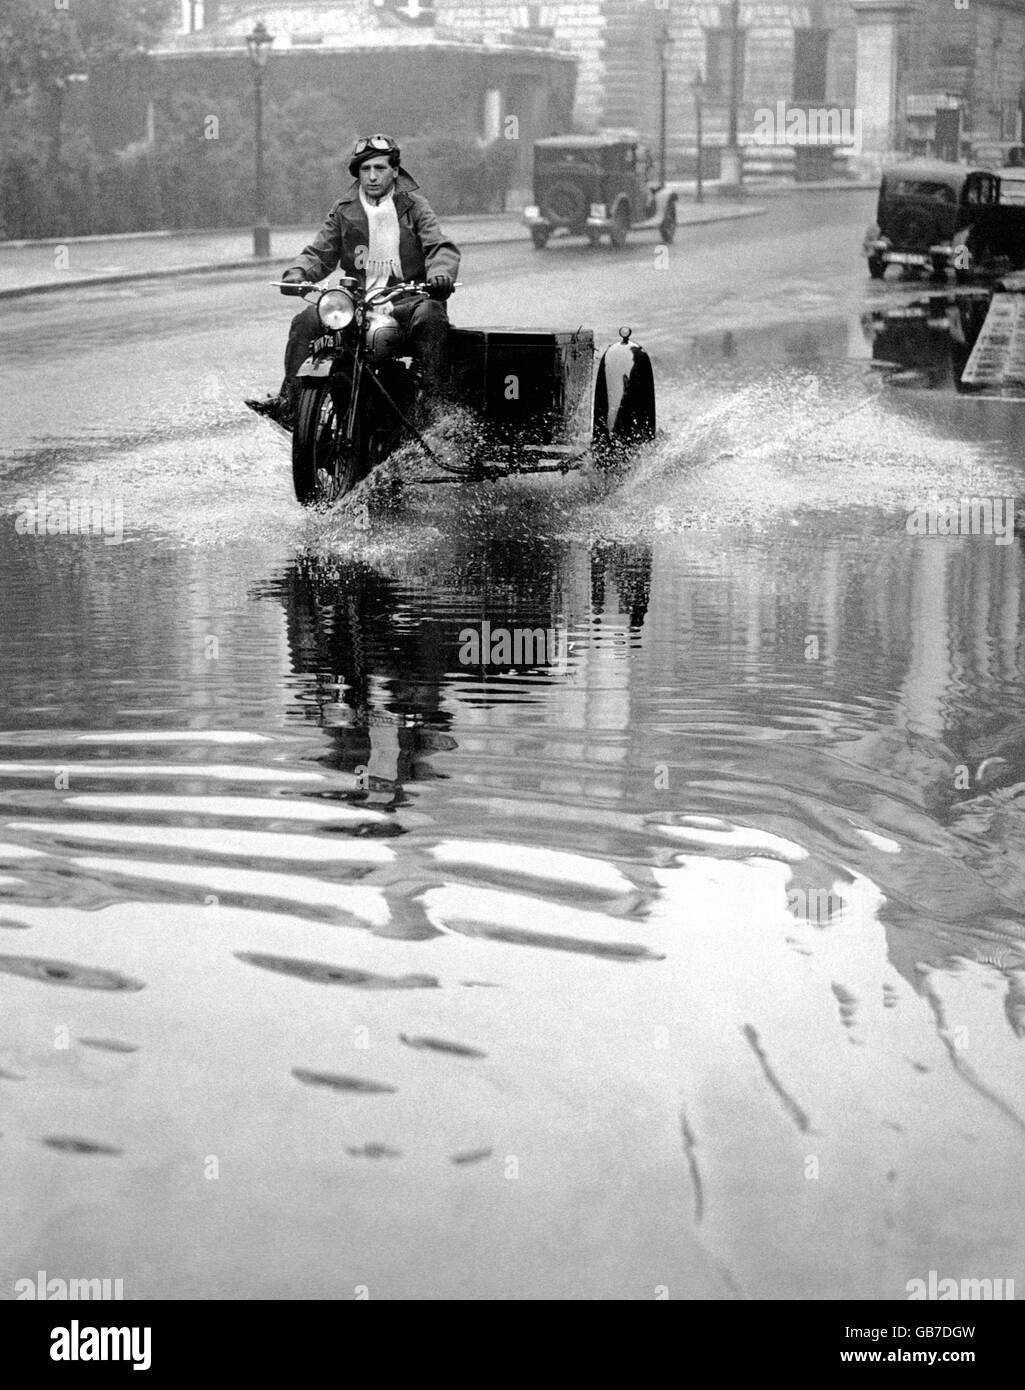 With his motorbike and side-car, an adventurous motorcyclist ploughs his way through the swamped roadway on Birdcage Walk, London, where the huge deluge of water caused flooding. Stock Photo